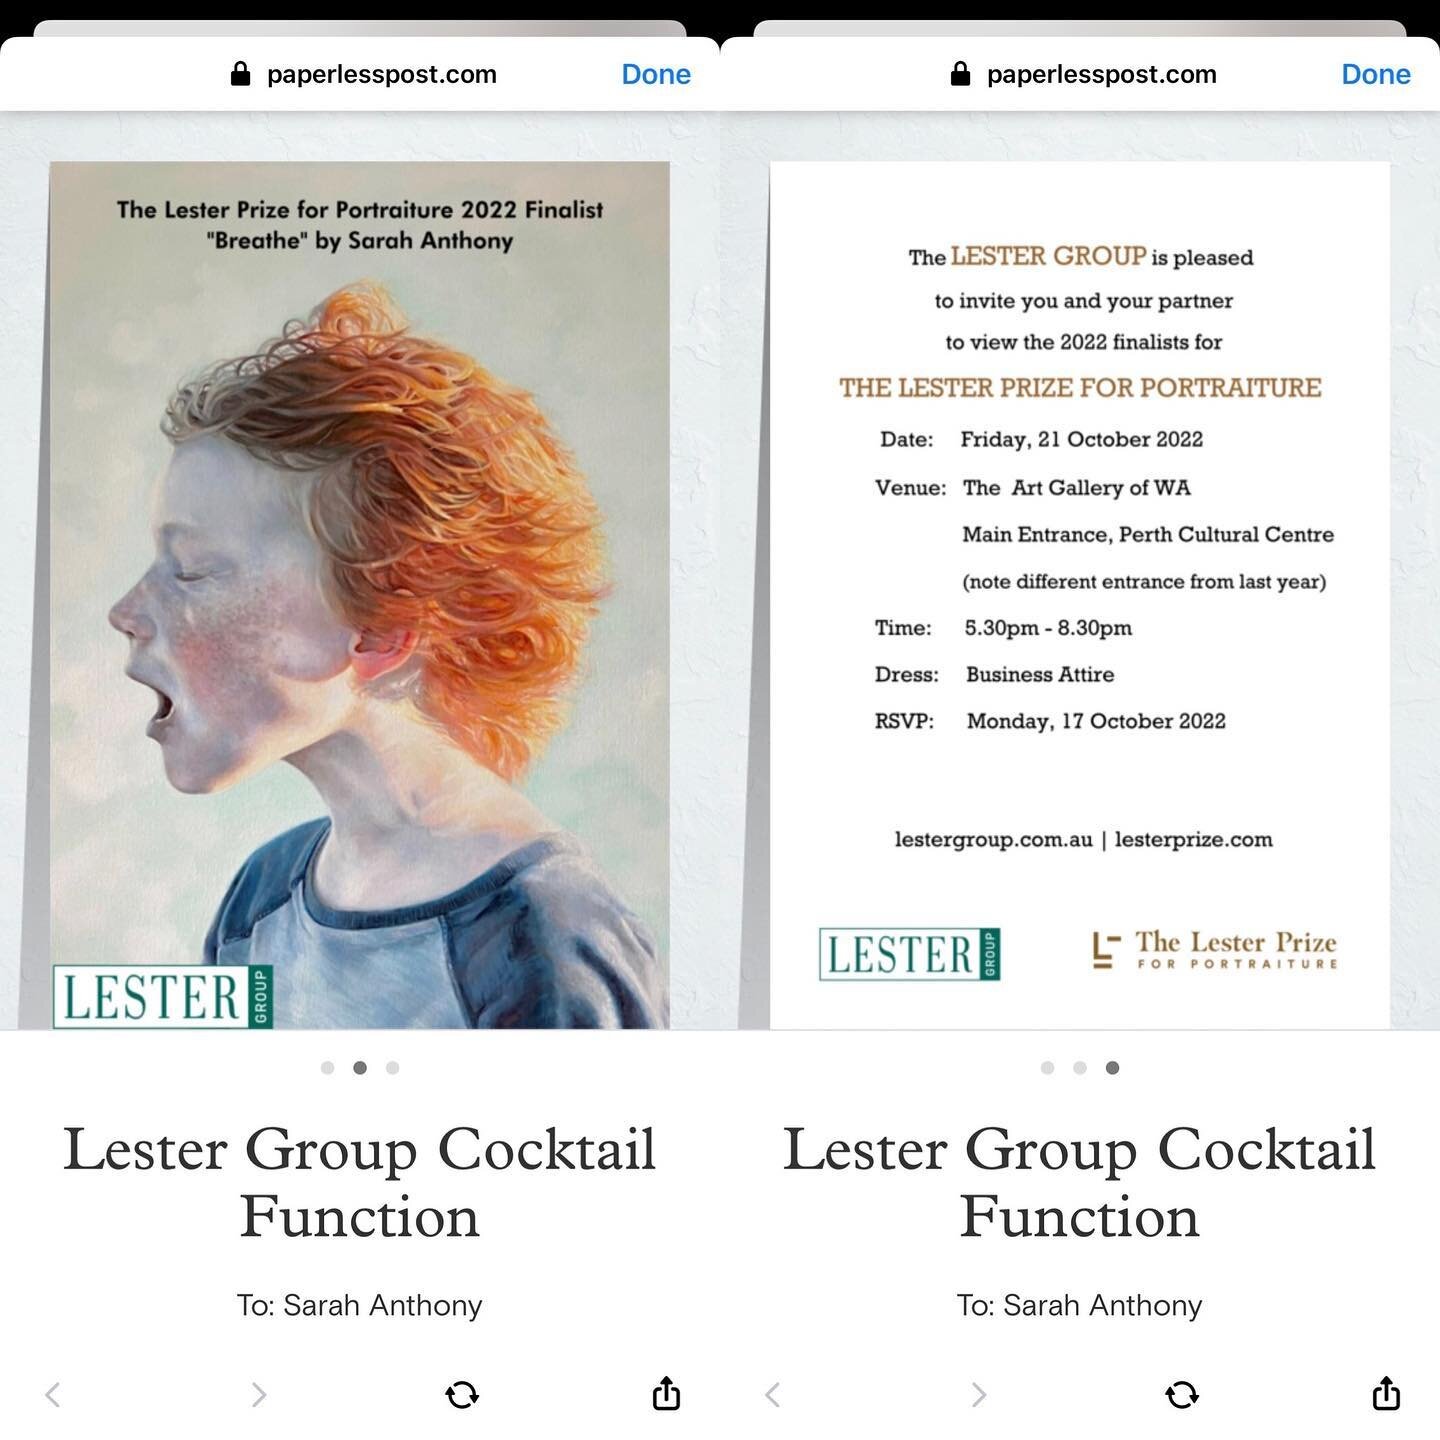 Lovely to see my painting &lsquo;Breathe&rsquo; fronting the invitation for the Lester Group corporate cocktail party at the Lester Prize 2022. 

Not long to go and I&rsquo;ll be off to WA to see all the wonderful art in person! @thelesterprize  @art